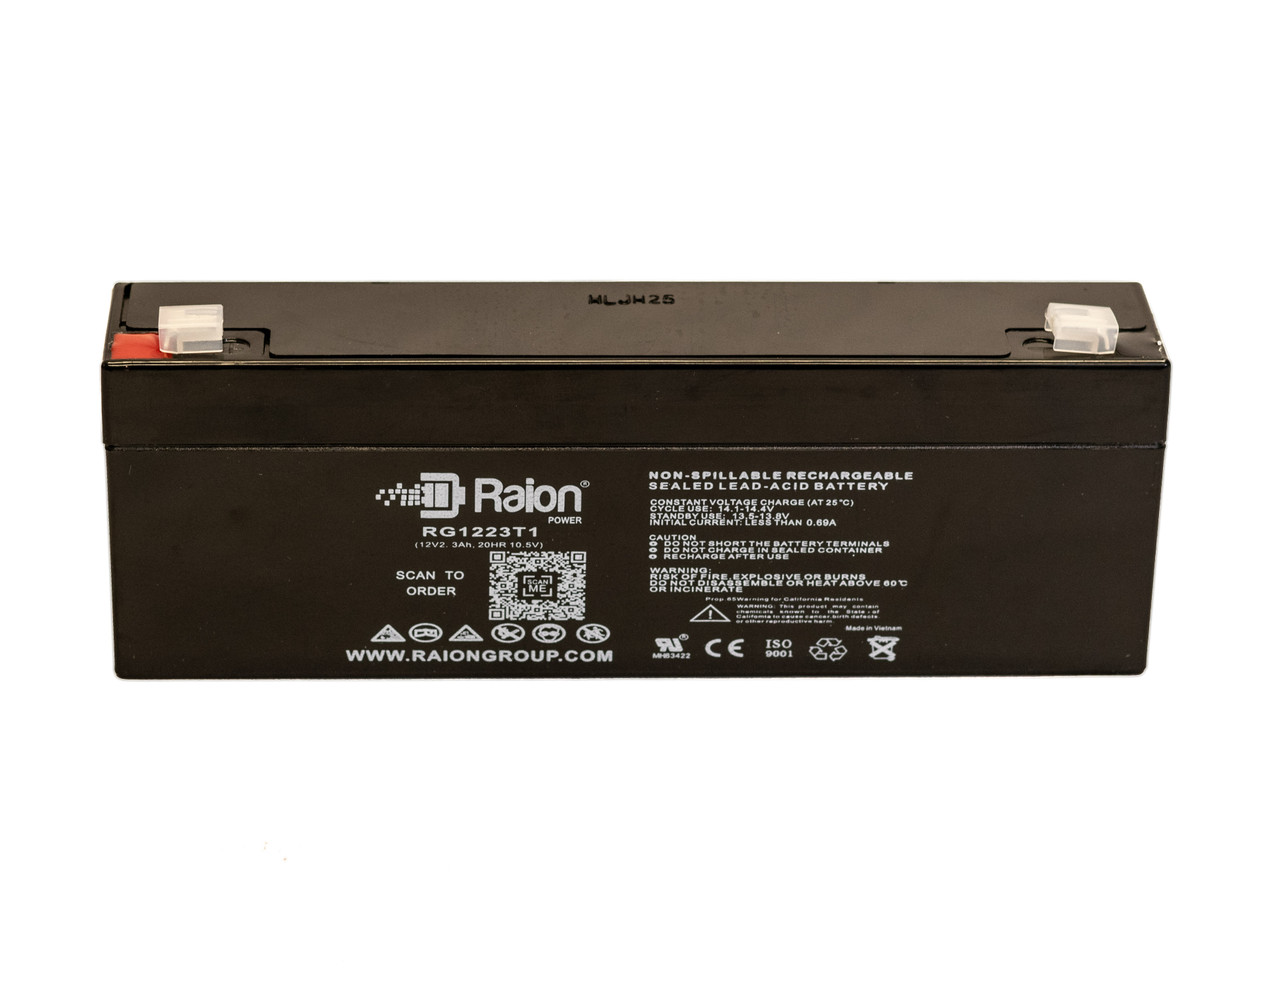 Raion Power 12V 2.3Ah SLA Battery With T1 Terminals For GE Medical Systems Vivid 7 Ultrasound